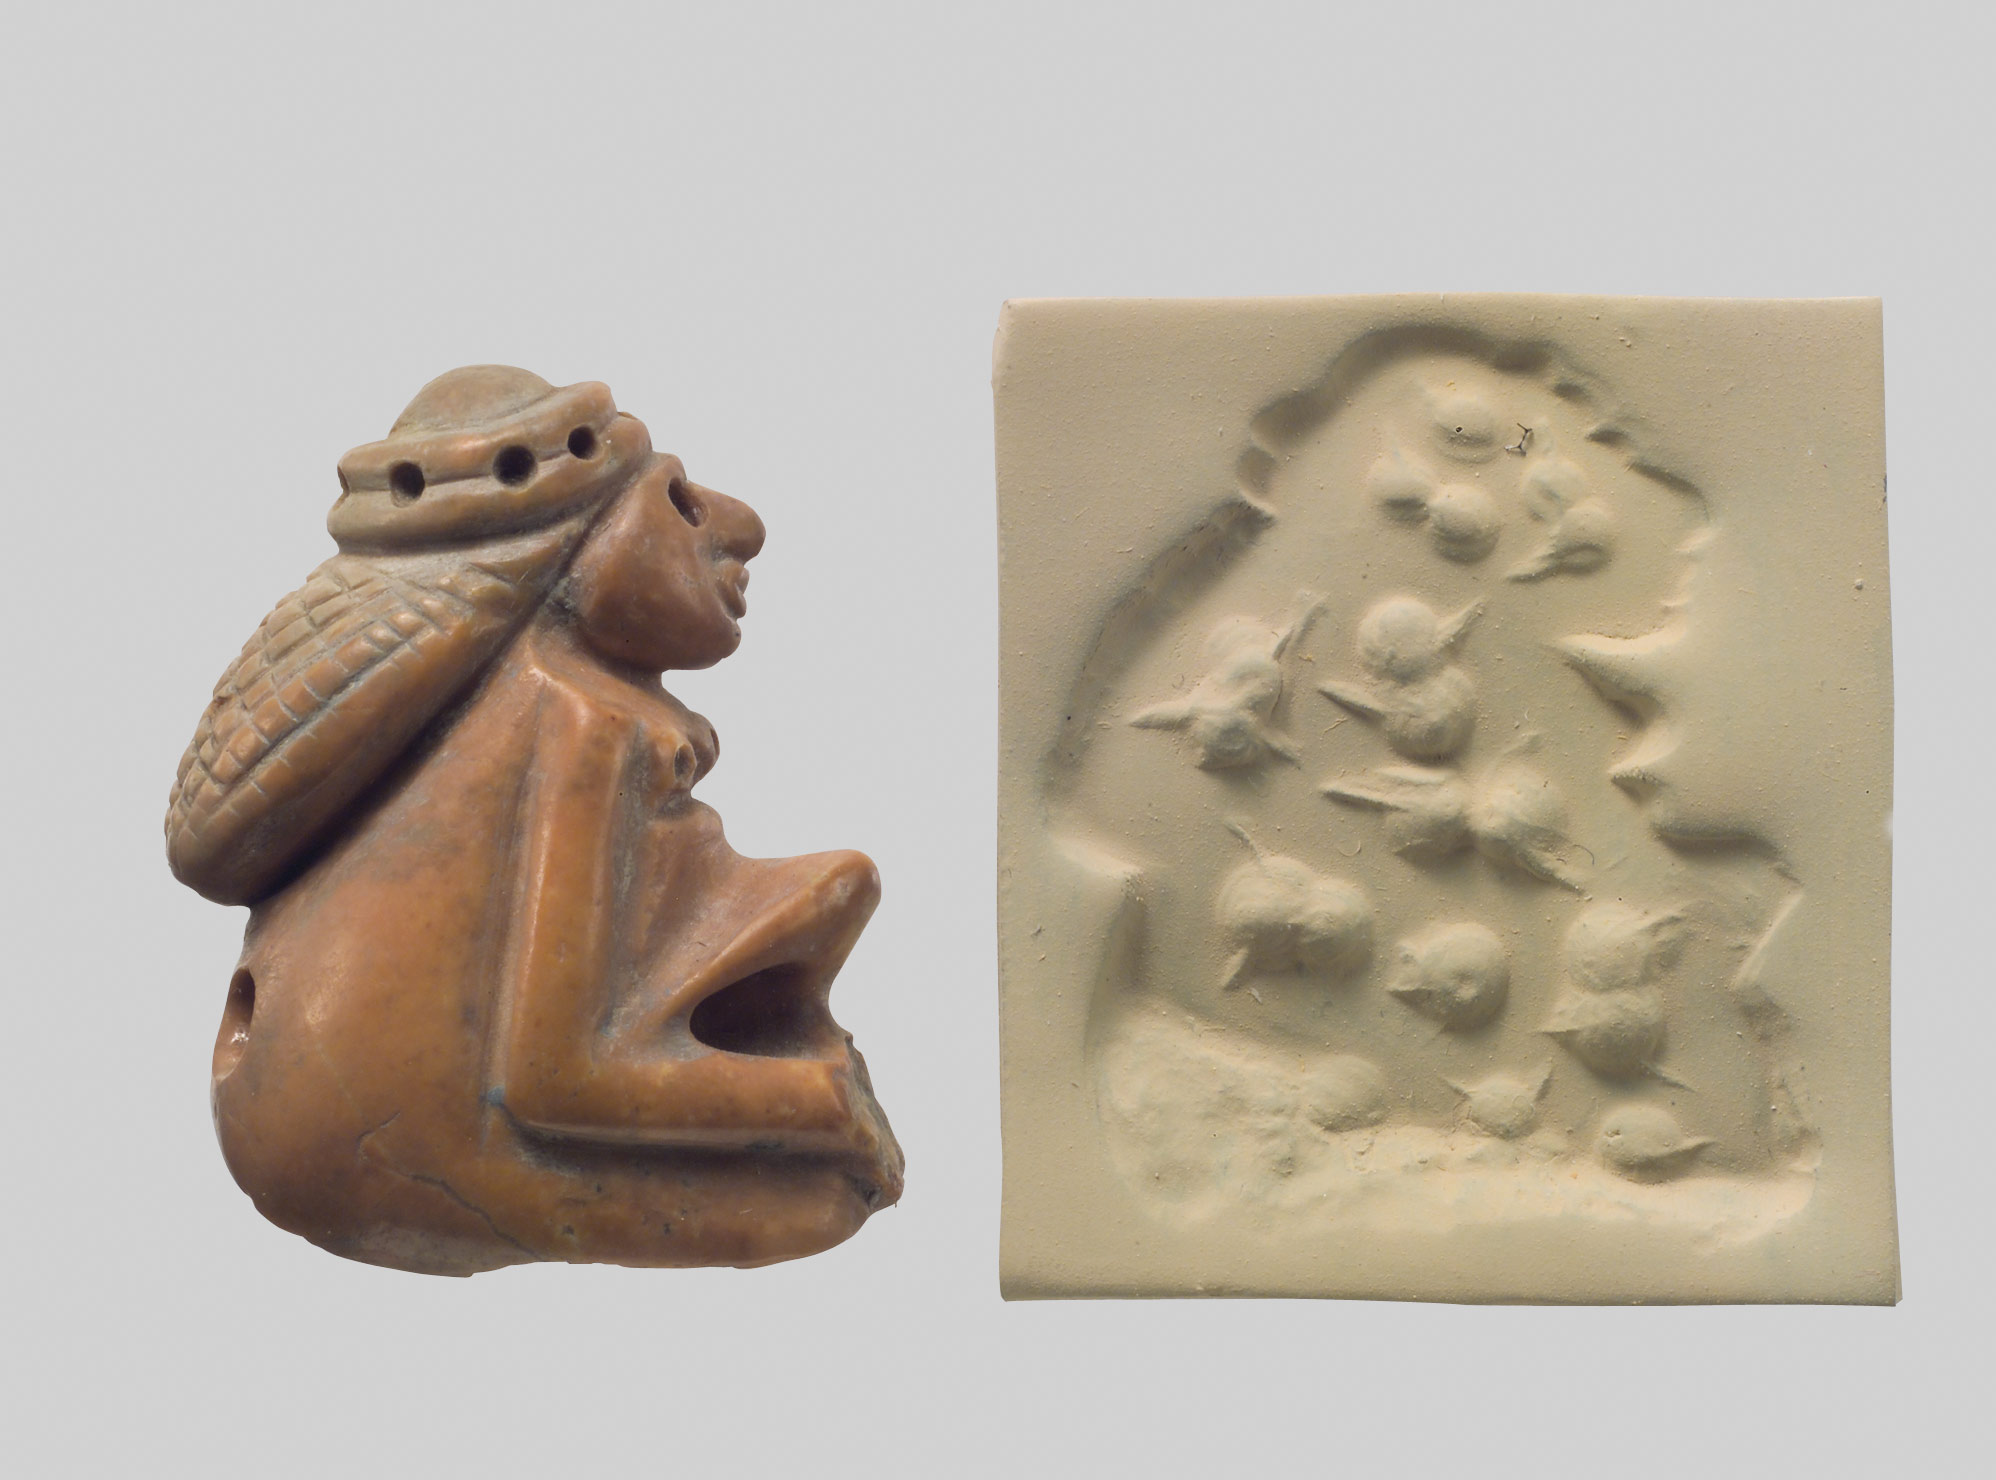 Stamp seal amulet of a seated woman Hb_1988.380.1